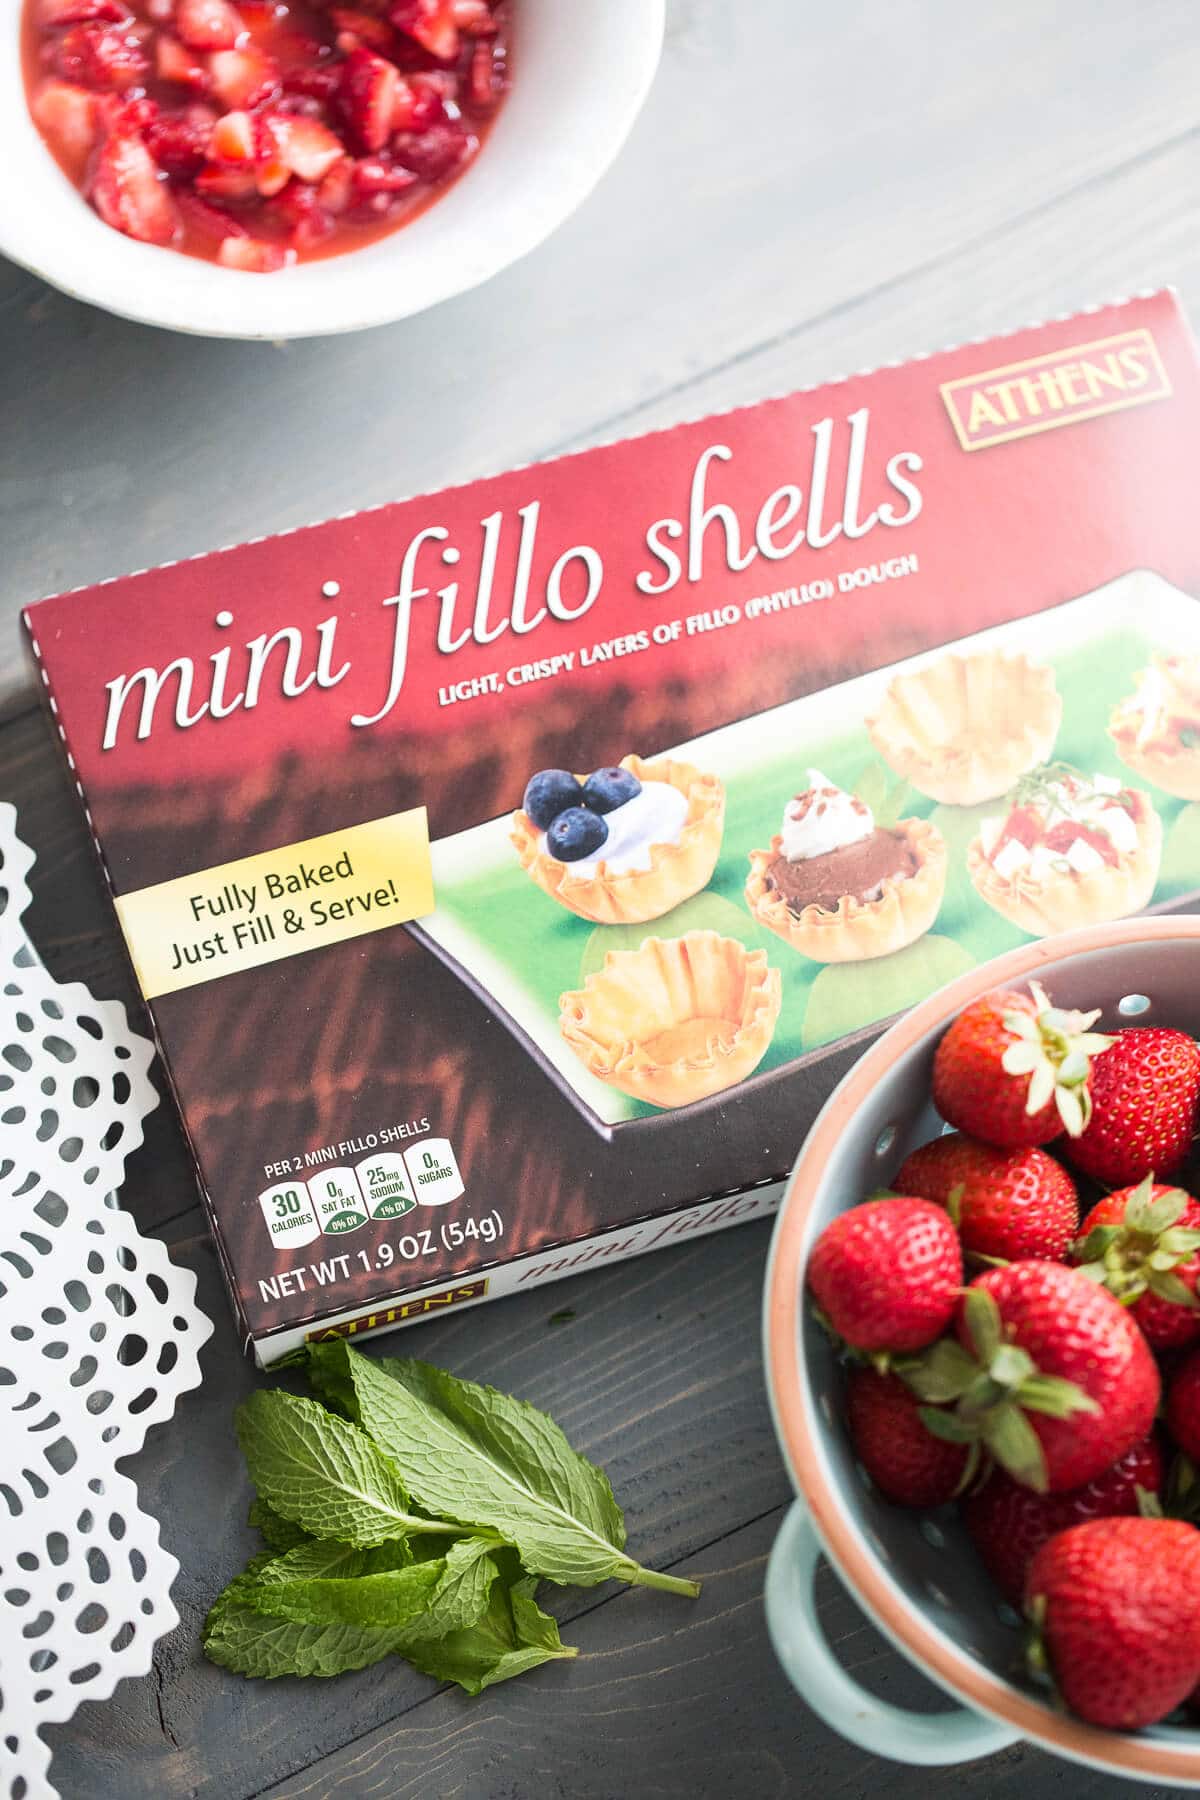 Strawberries Romanoff is such a great way to use fresh strawberries. Fillo cups make the best cups for this simple, fruity recipe.